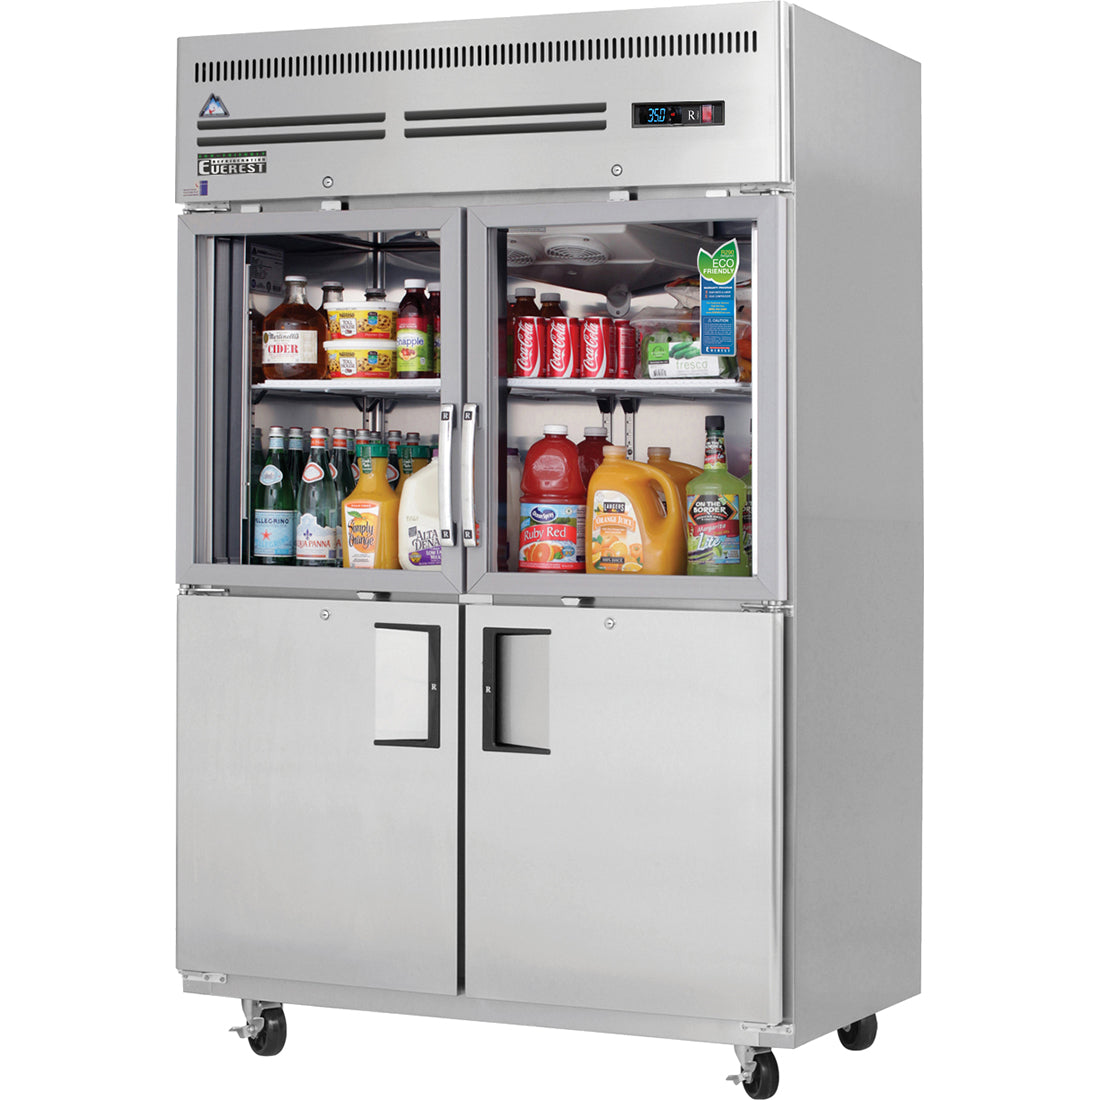 Everest ES Series-EGSH4 Two Section Glass/Solid Half Door Upright Reach-In Refrigerator - 48 Cu. Ft.